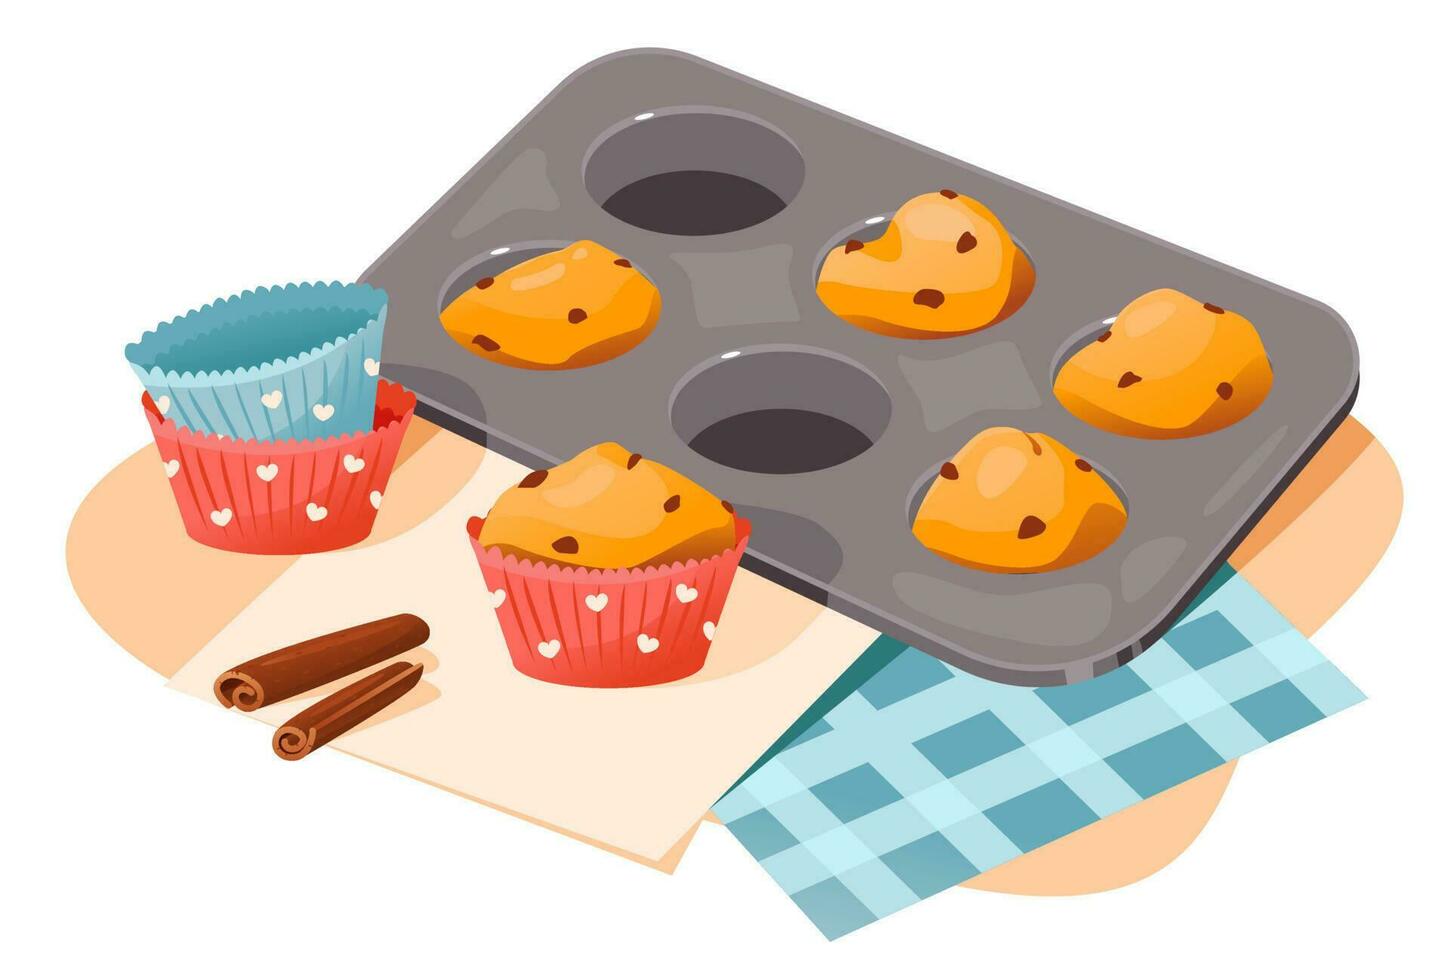 Cupcakes in baking molds. Homemade cakes. Cartoon flat vector illustration.